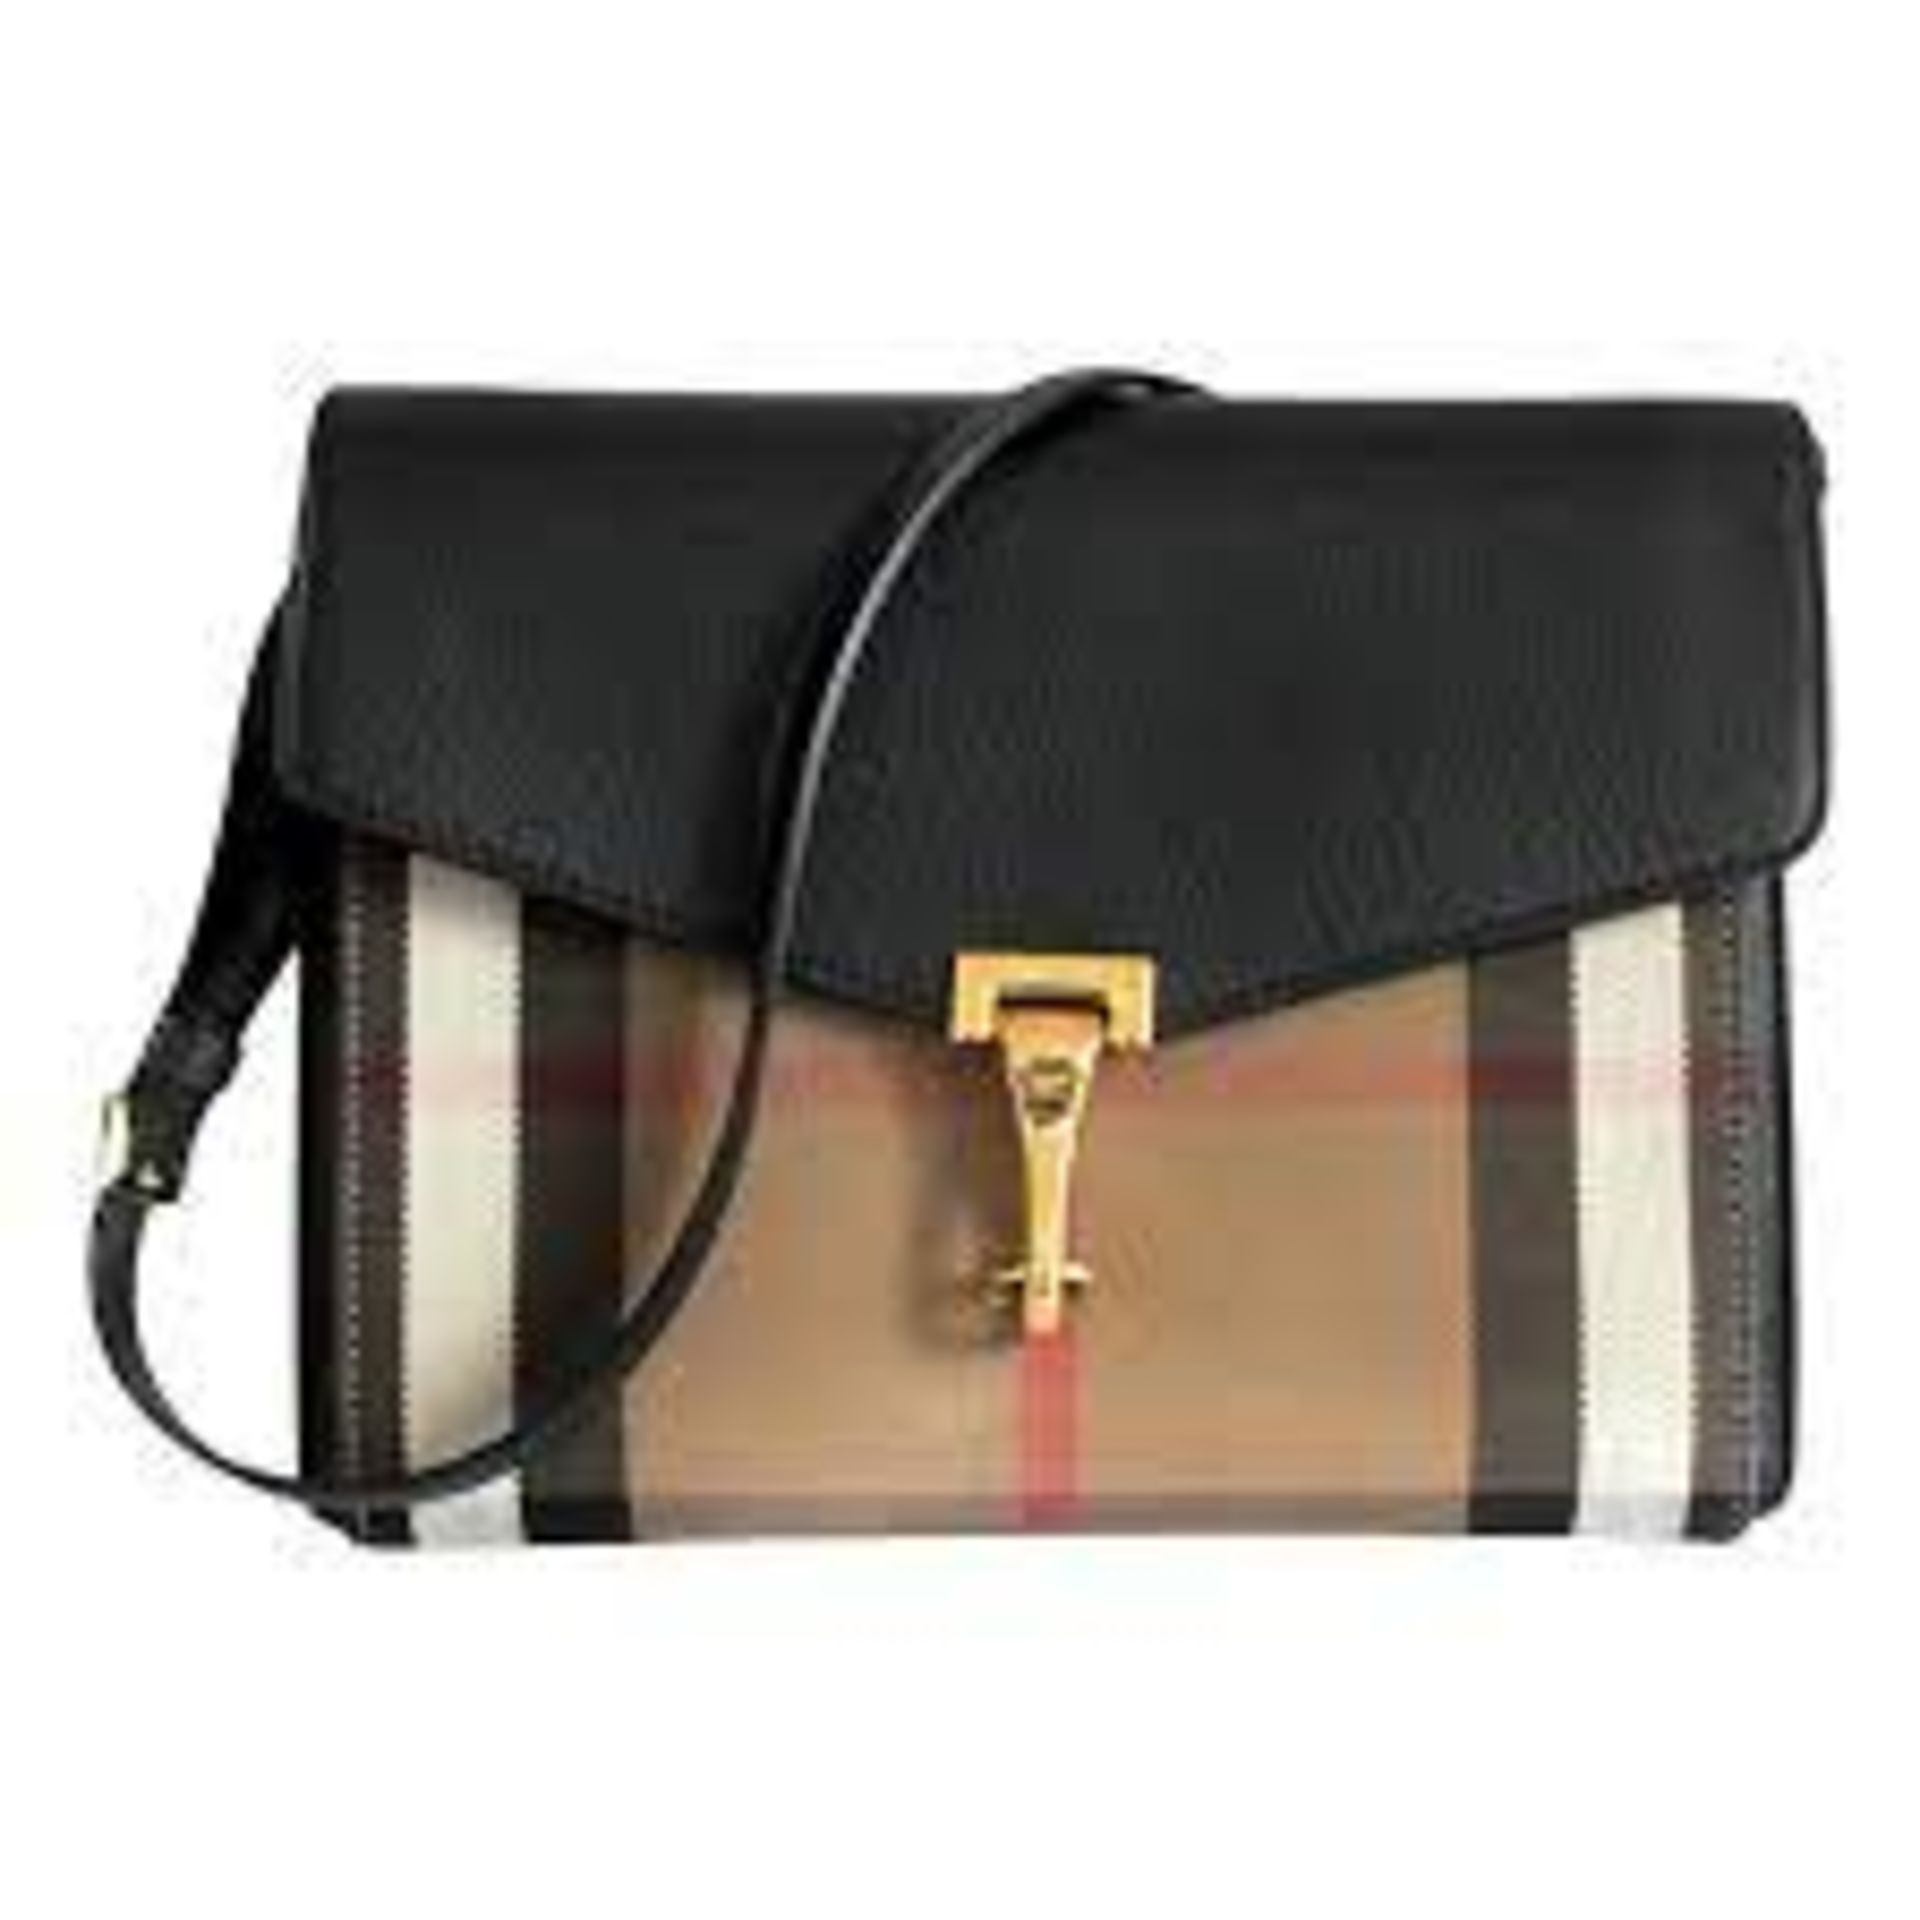 Genuine Burberry Macken Leather and House Check Crossbody Bag 22/28 - Image 2 of 8